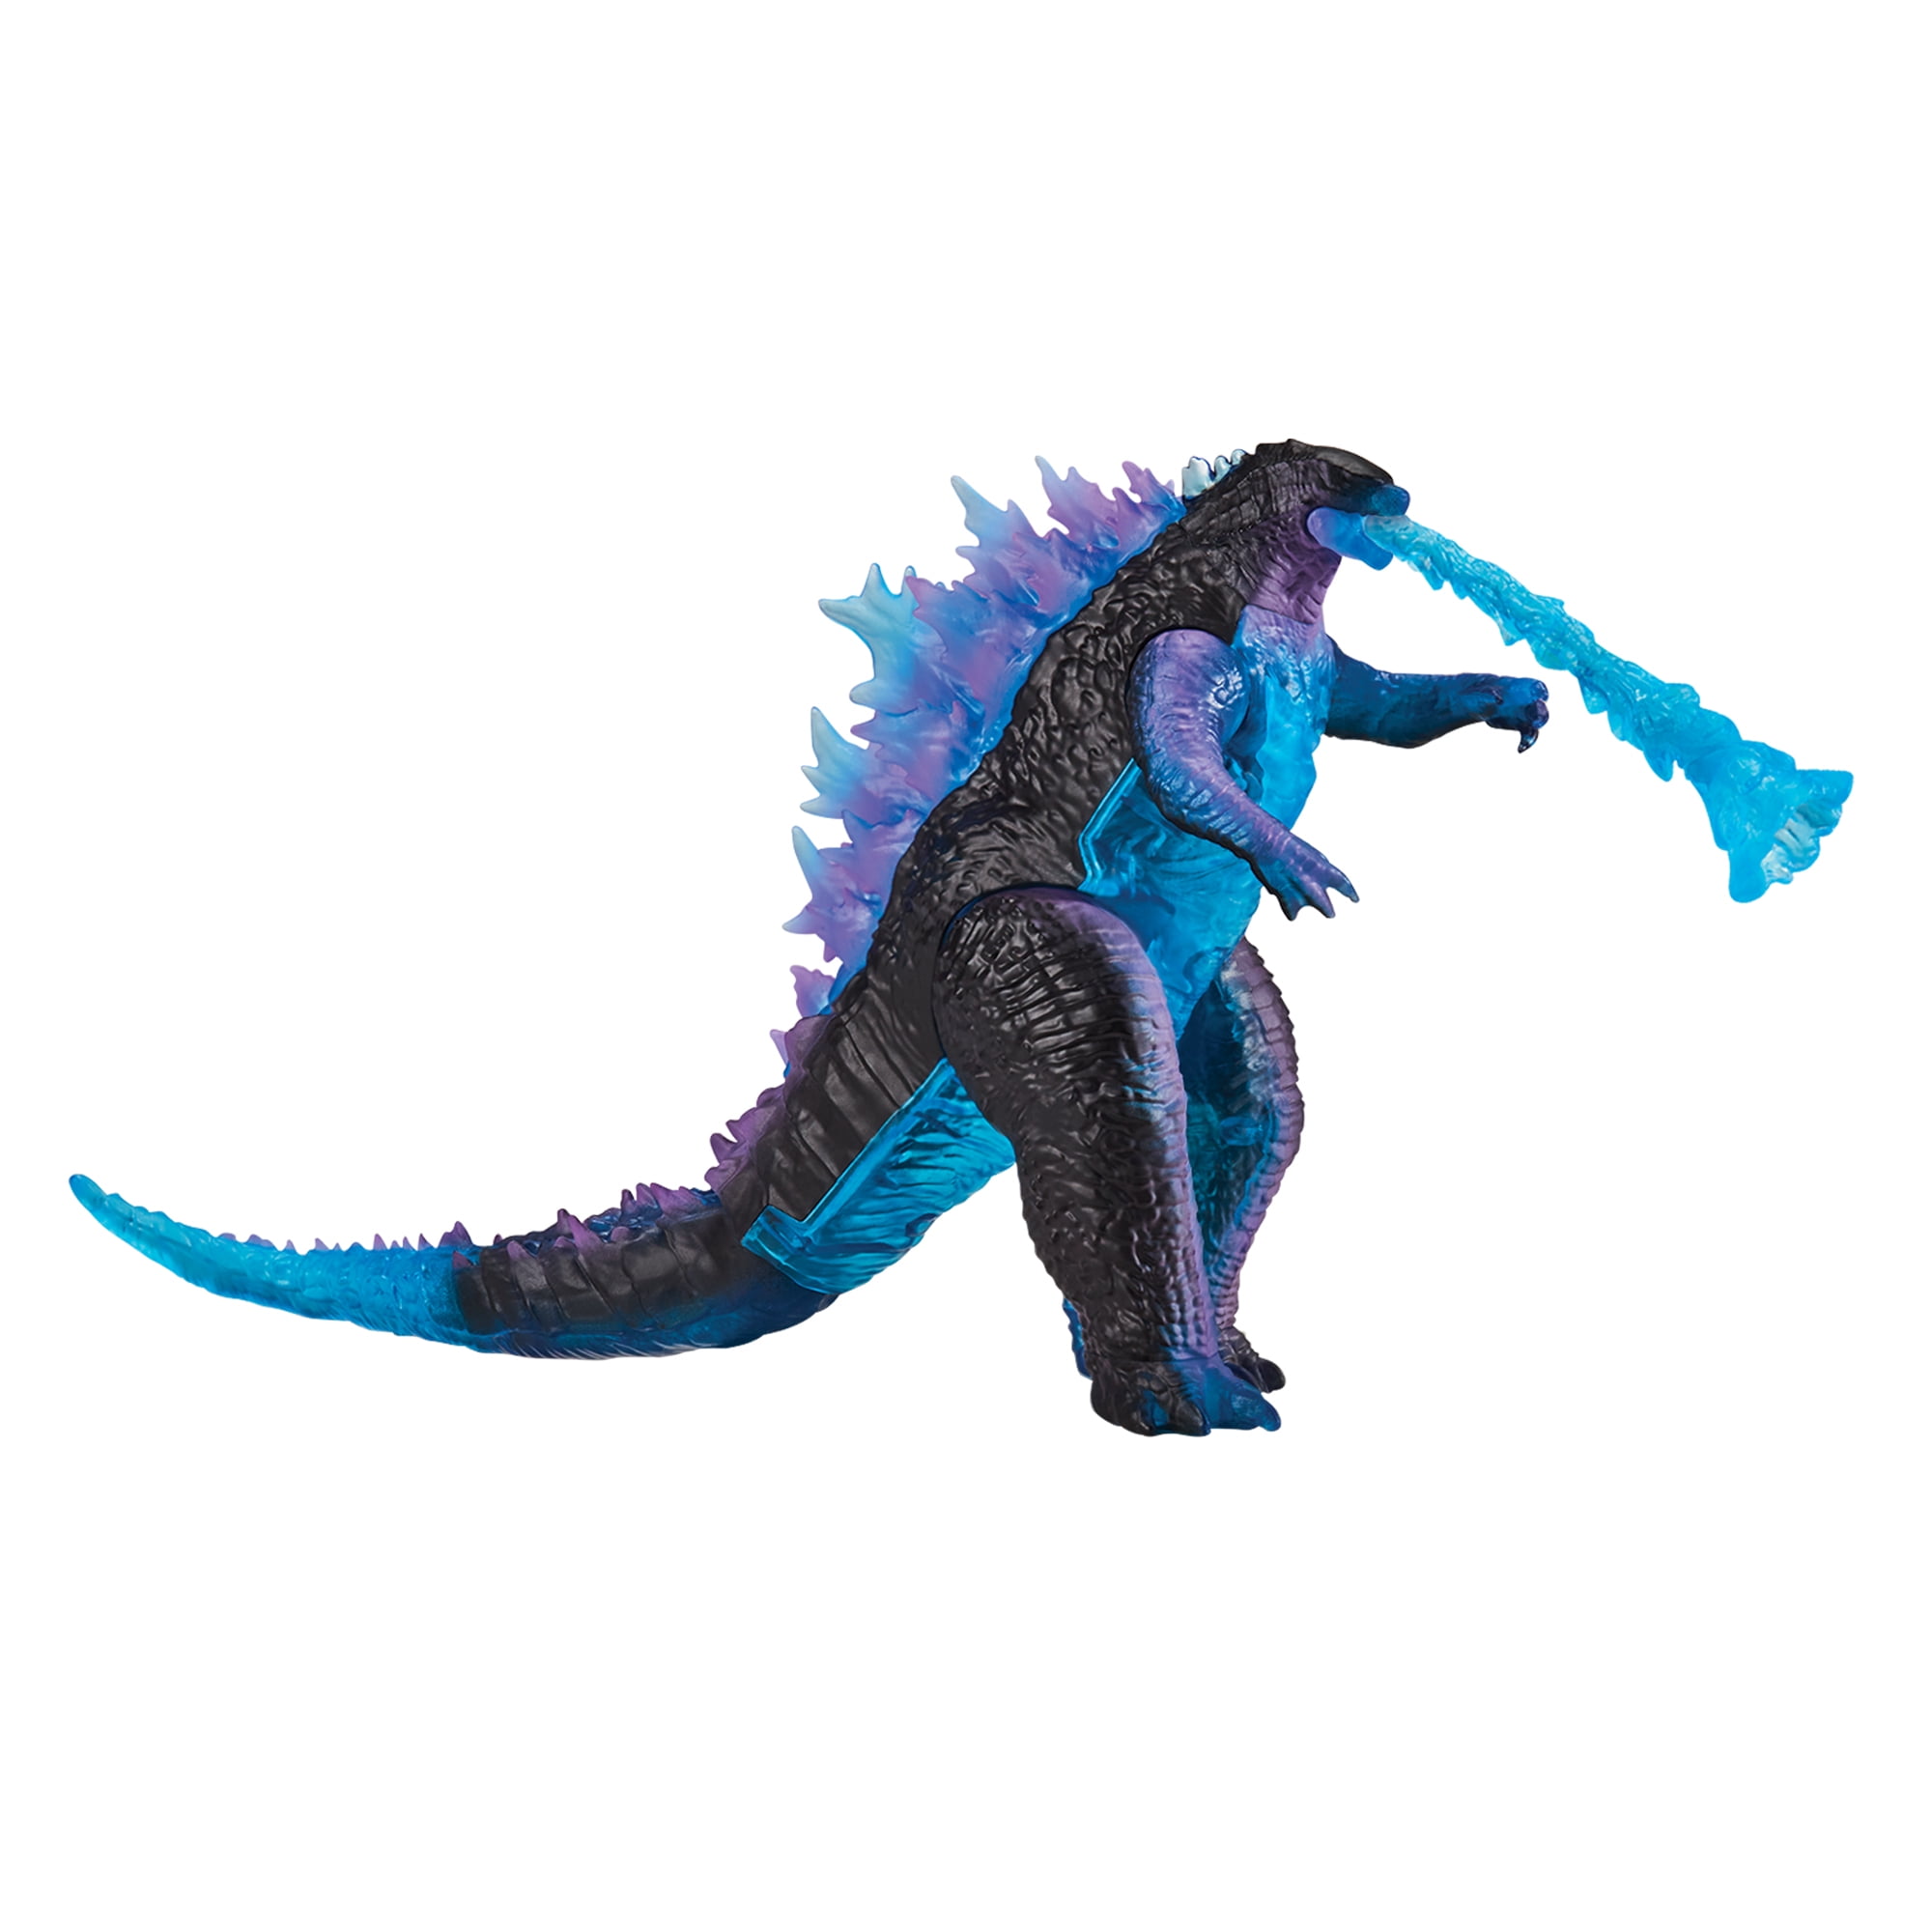 1954 Godzilla Action Figure Playmates Toys 6 Inches Tall 60th Anniversary for sale online 